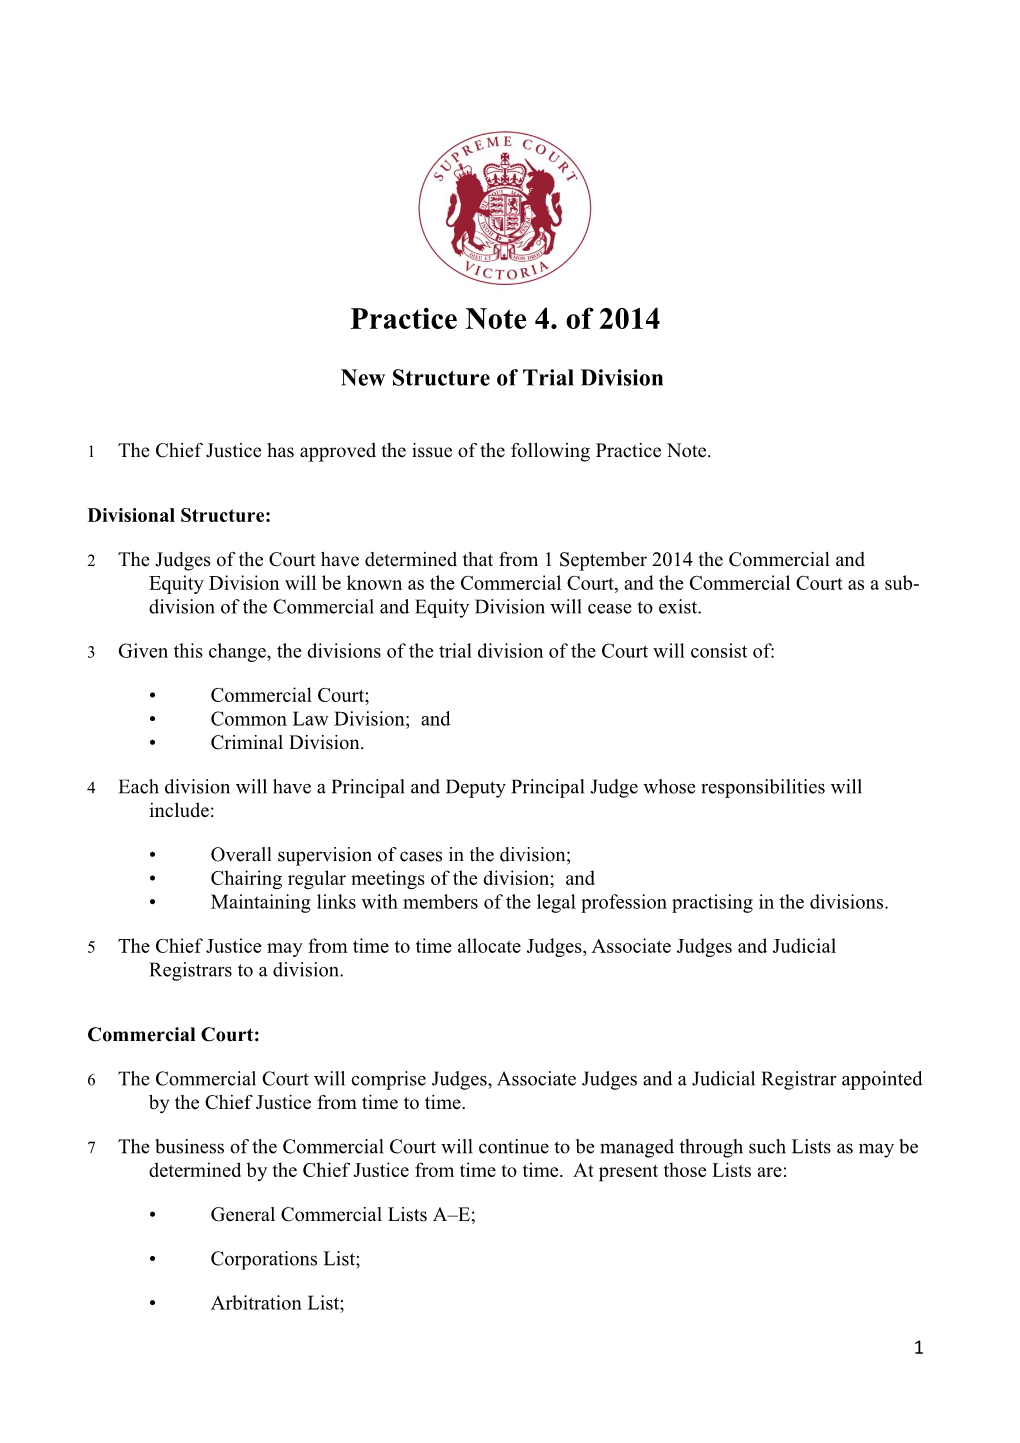 Practice Note 4 of 2014 New Structure of Trial Division